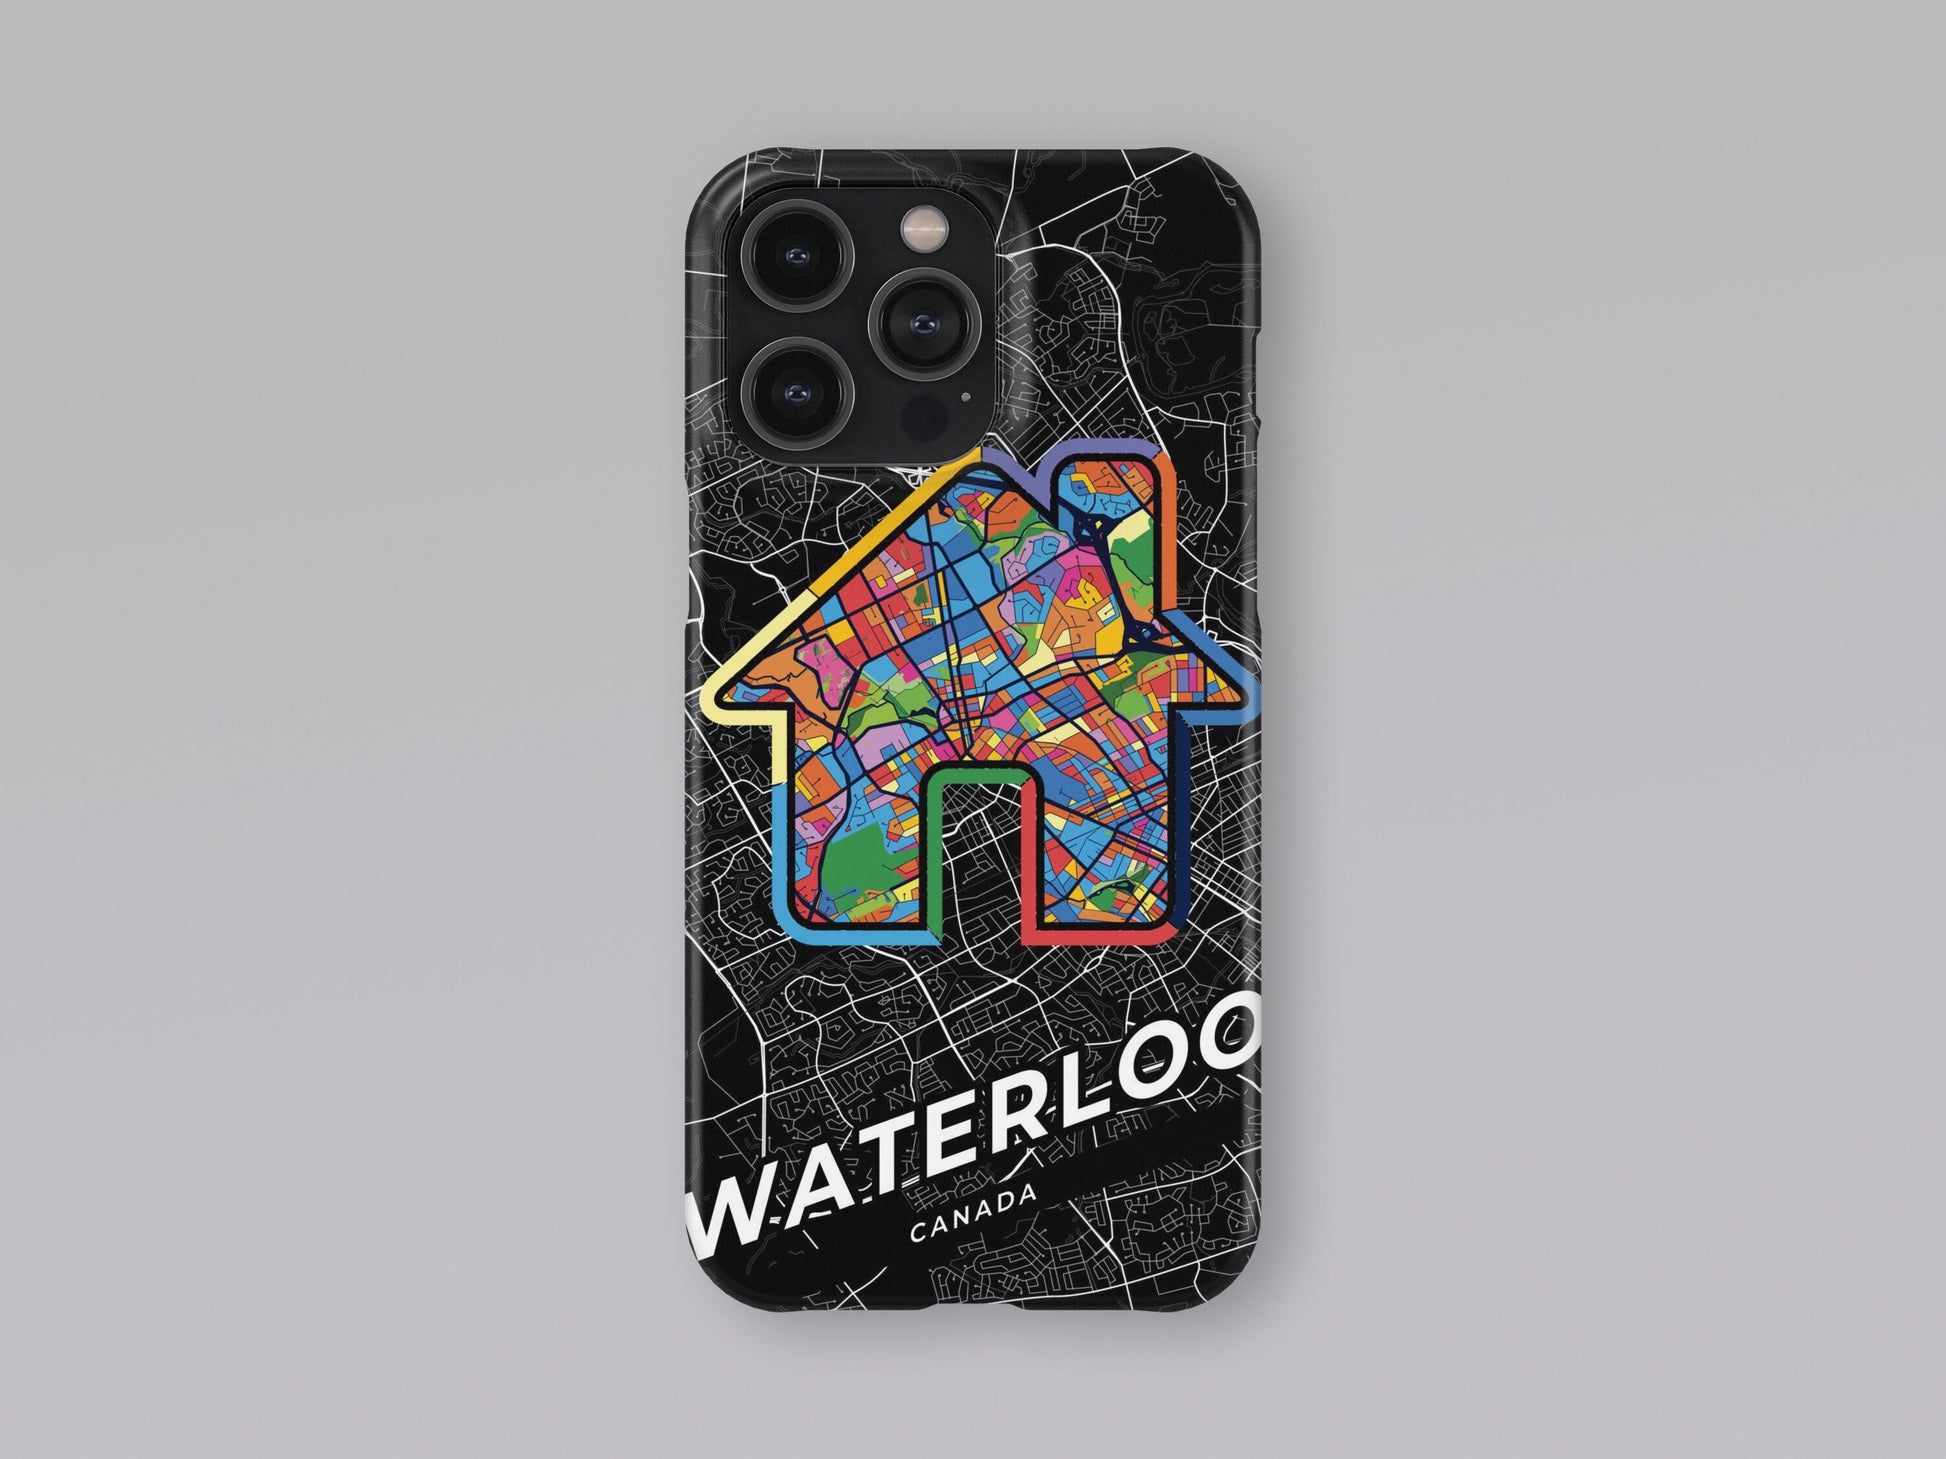 Waterloo Canada slim phone case with colorful icon 3